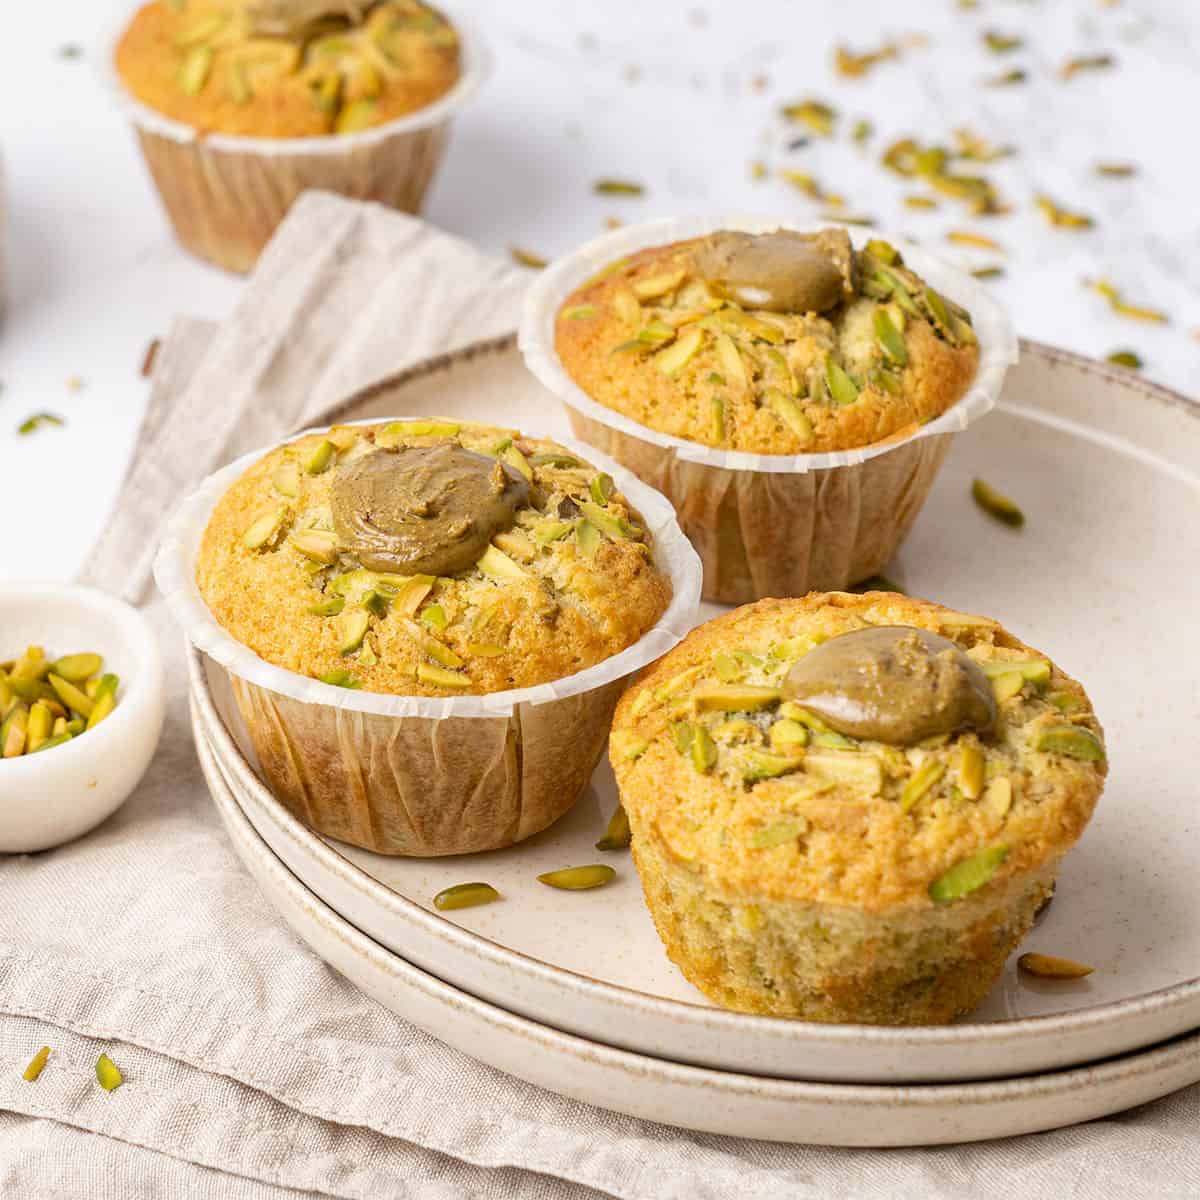 <p>If you like pistachios, you will love these delicious bakery-style <a href="https://www.spatuladesserts.com/pistachio-muffins/">pistachio muffins</a>! This easy muffin recipe uses 100% natural ingredients and combines oil and butter to make the most flavorful, moist, and fluffy muffins, they are then topped with homemade pistachio butter. Pistachio muffins without pudding or artificial flavors and color!</p> <p><strong>Go to the recipe: <a href="https://www.spatuladesserts.com/pistachio-muffins/">Pistachio Muffins</a></strong></p>